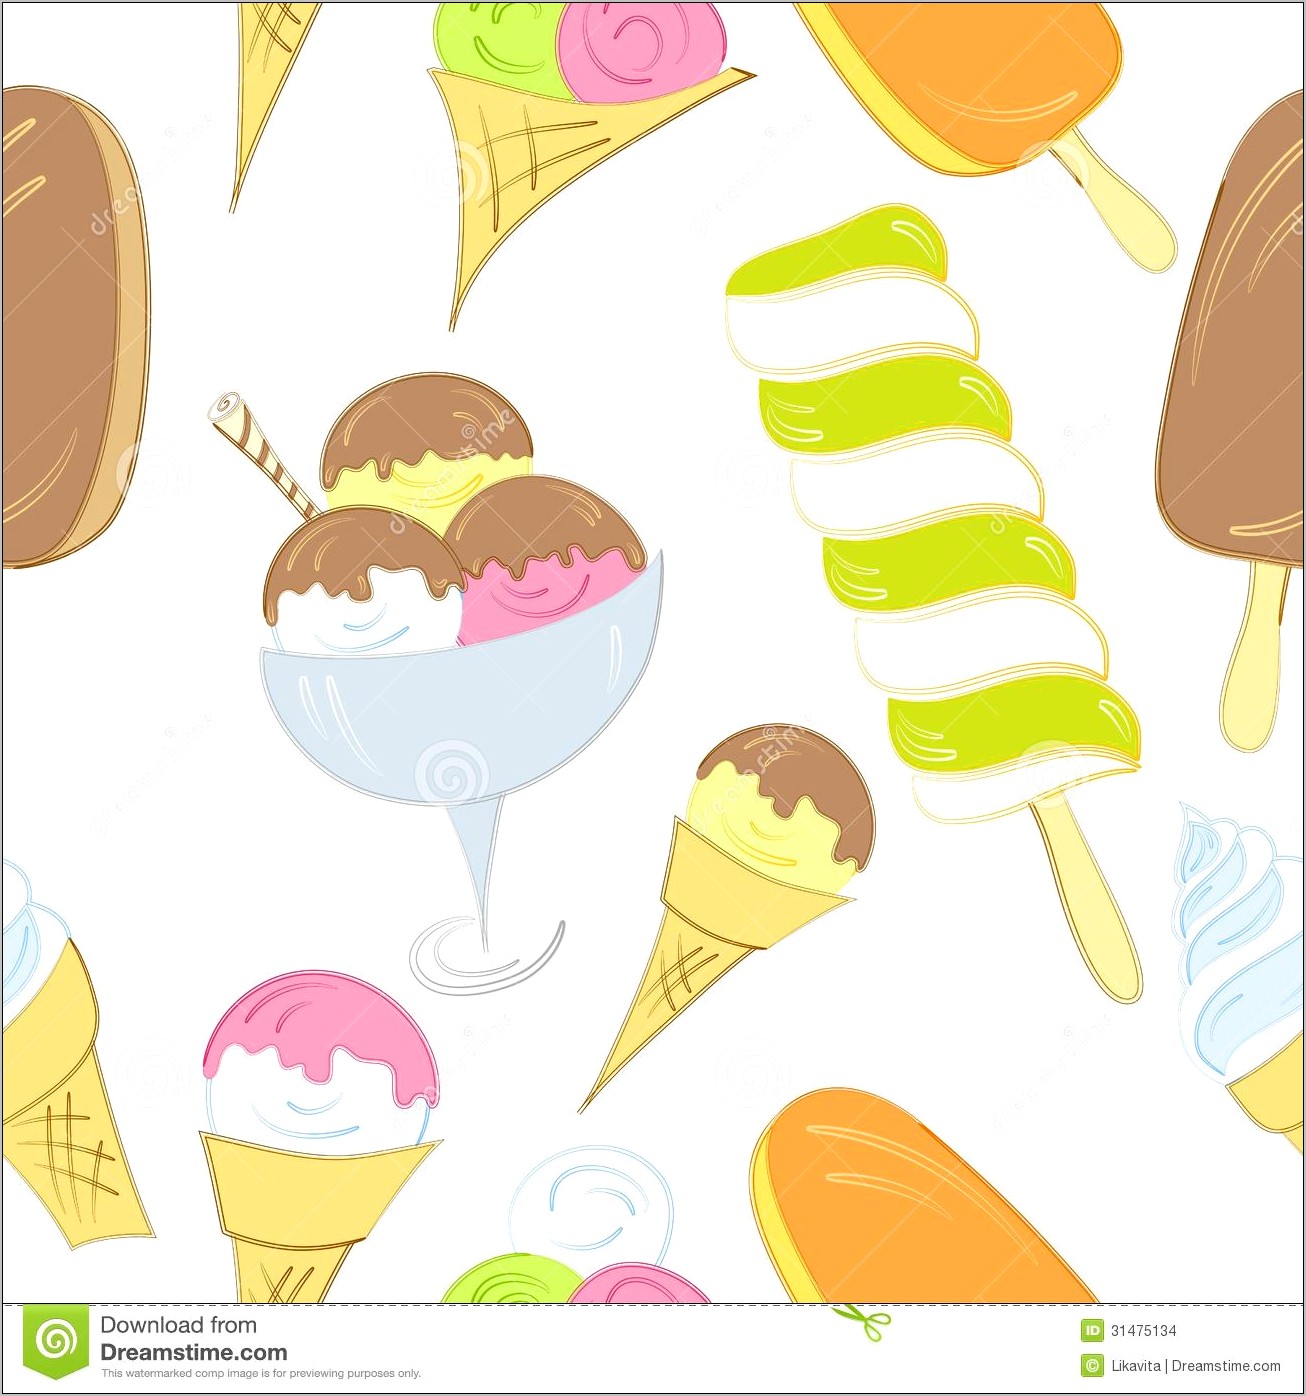 Ice Cream Powerpoint Template Free Download